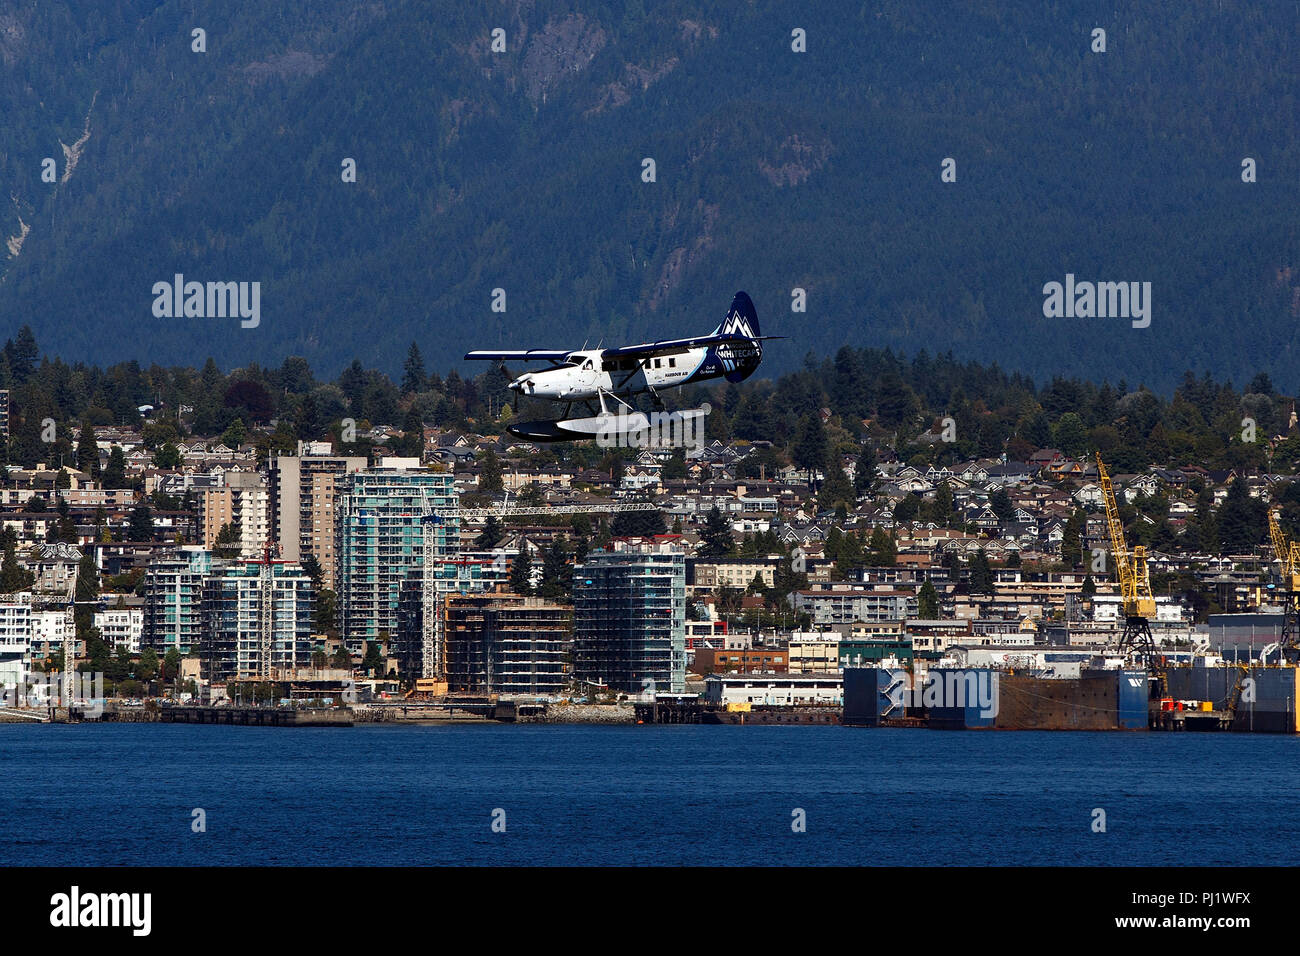 De Havilland Canada DHC-3T Otter (C-GHAZ) operated by Harbour Air with the Vancouver Whitecaps Livery lands in Vancouver Harbor, Vancouver, British Columbia, Canada Stock Photo